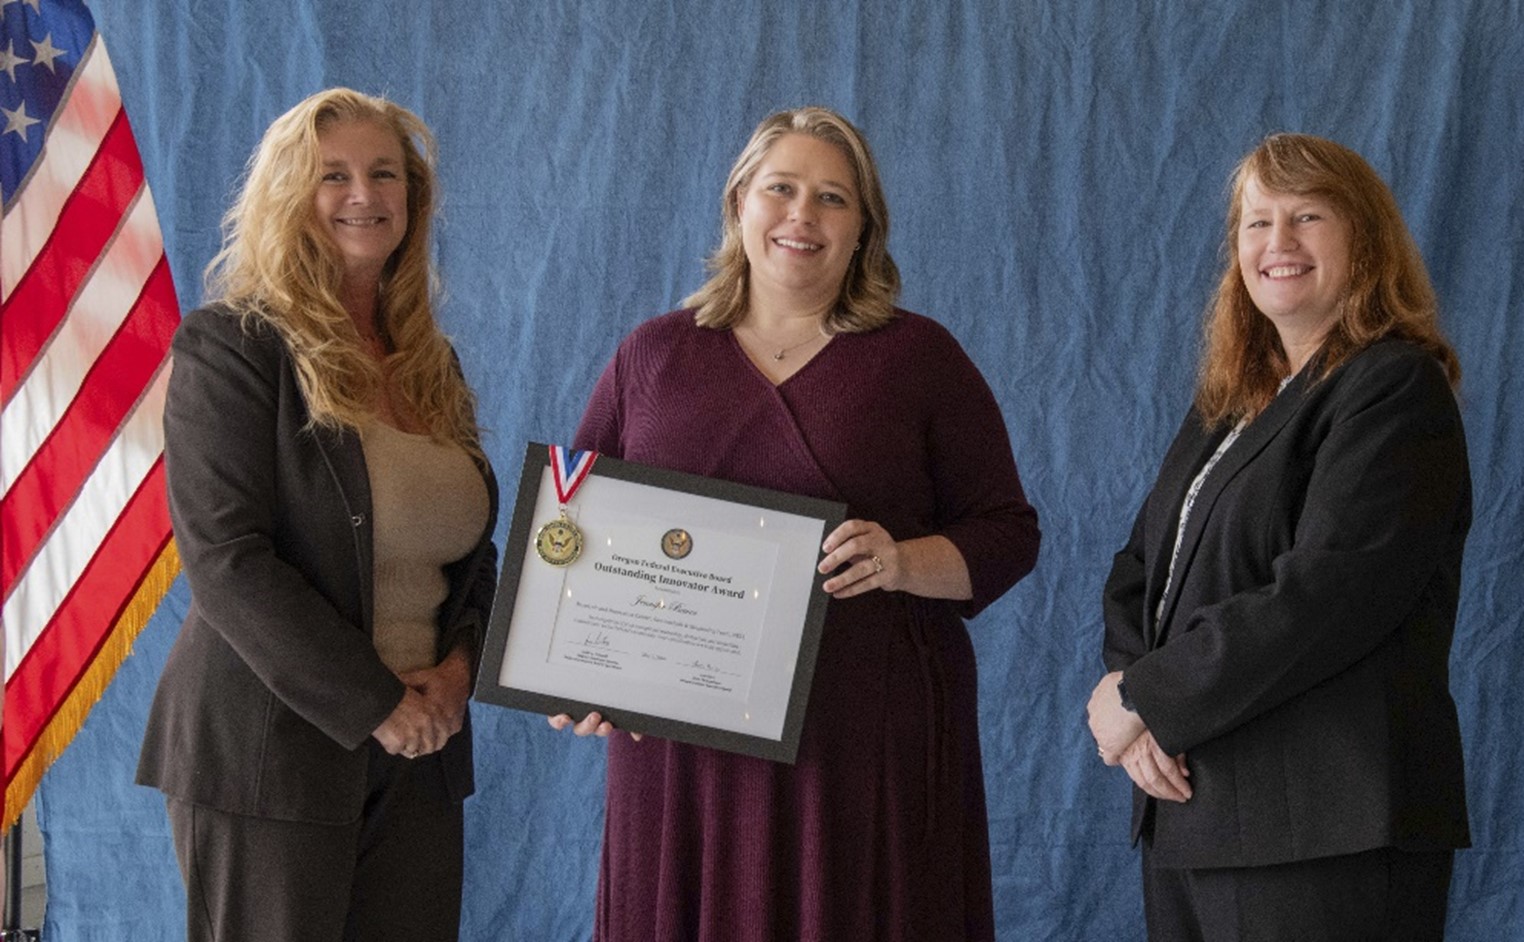 NETL’s Jennifer Bauer took home the award in the Outstanding Innovator category from the Oregon Federal Executive Board at a recent ceremony in Vancouver, Washington.